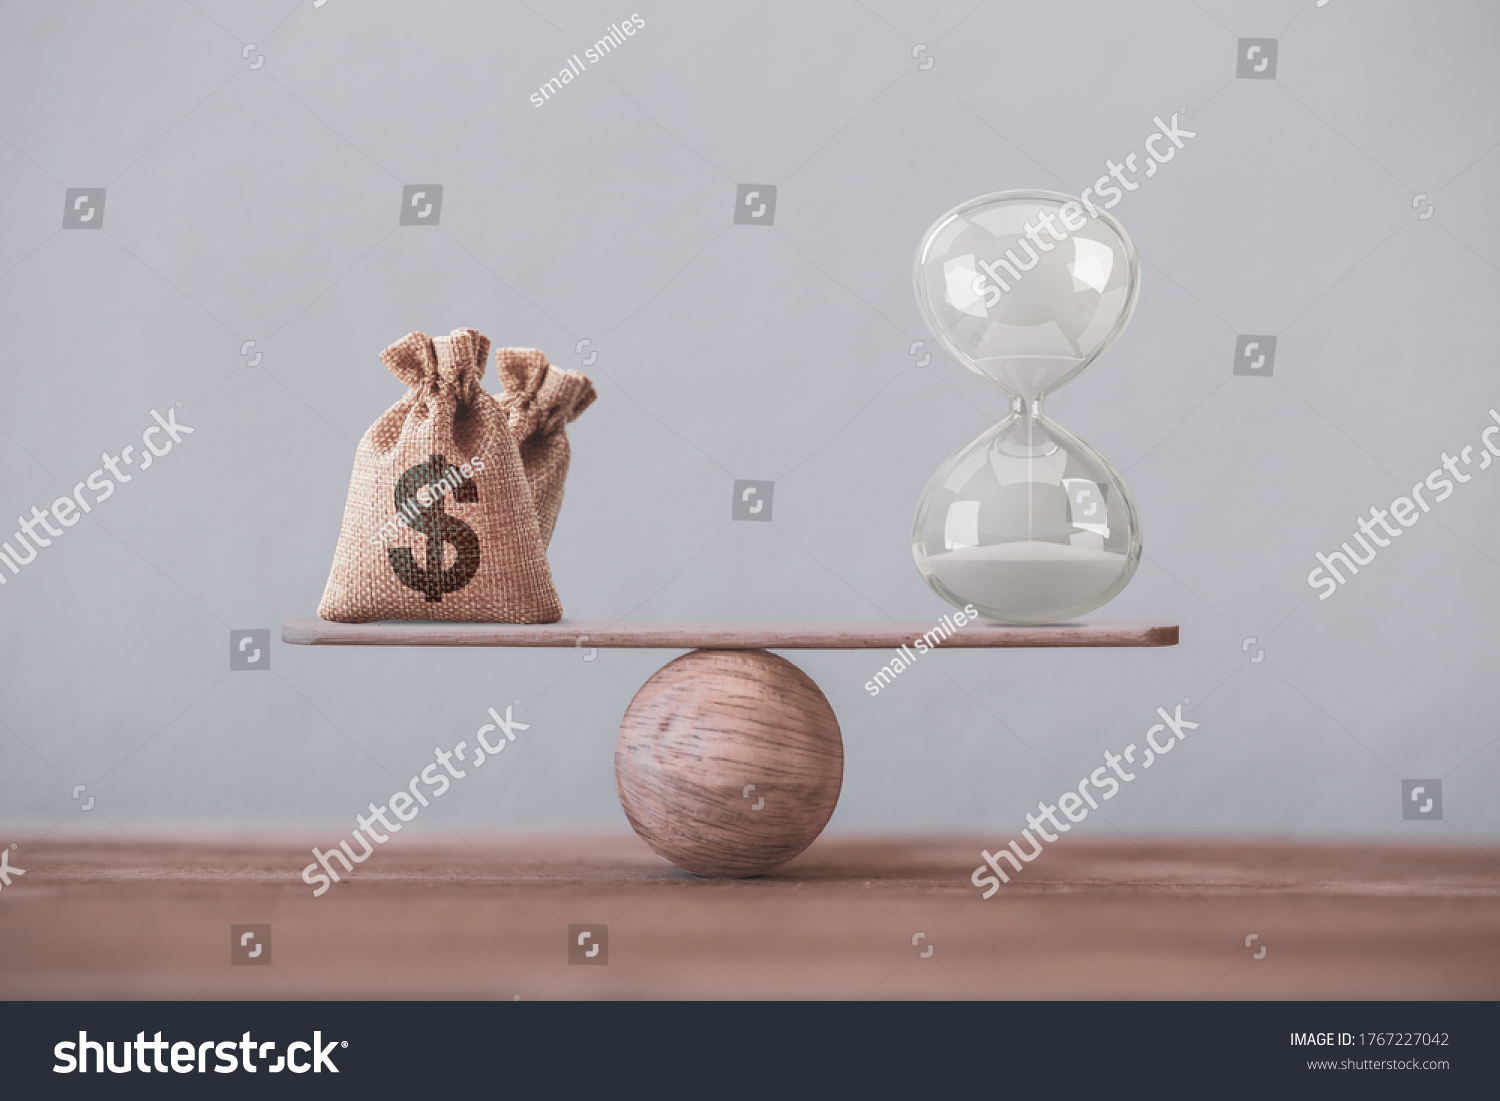 Write sand clock or hourglass and dollar bagson a balance scale in equal position on wood table. Financial concept : Time value of money, asset growth over time, depicts investment in long-term equity #1767227042